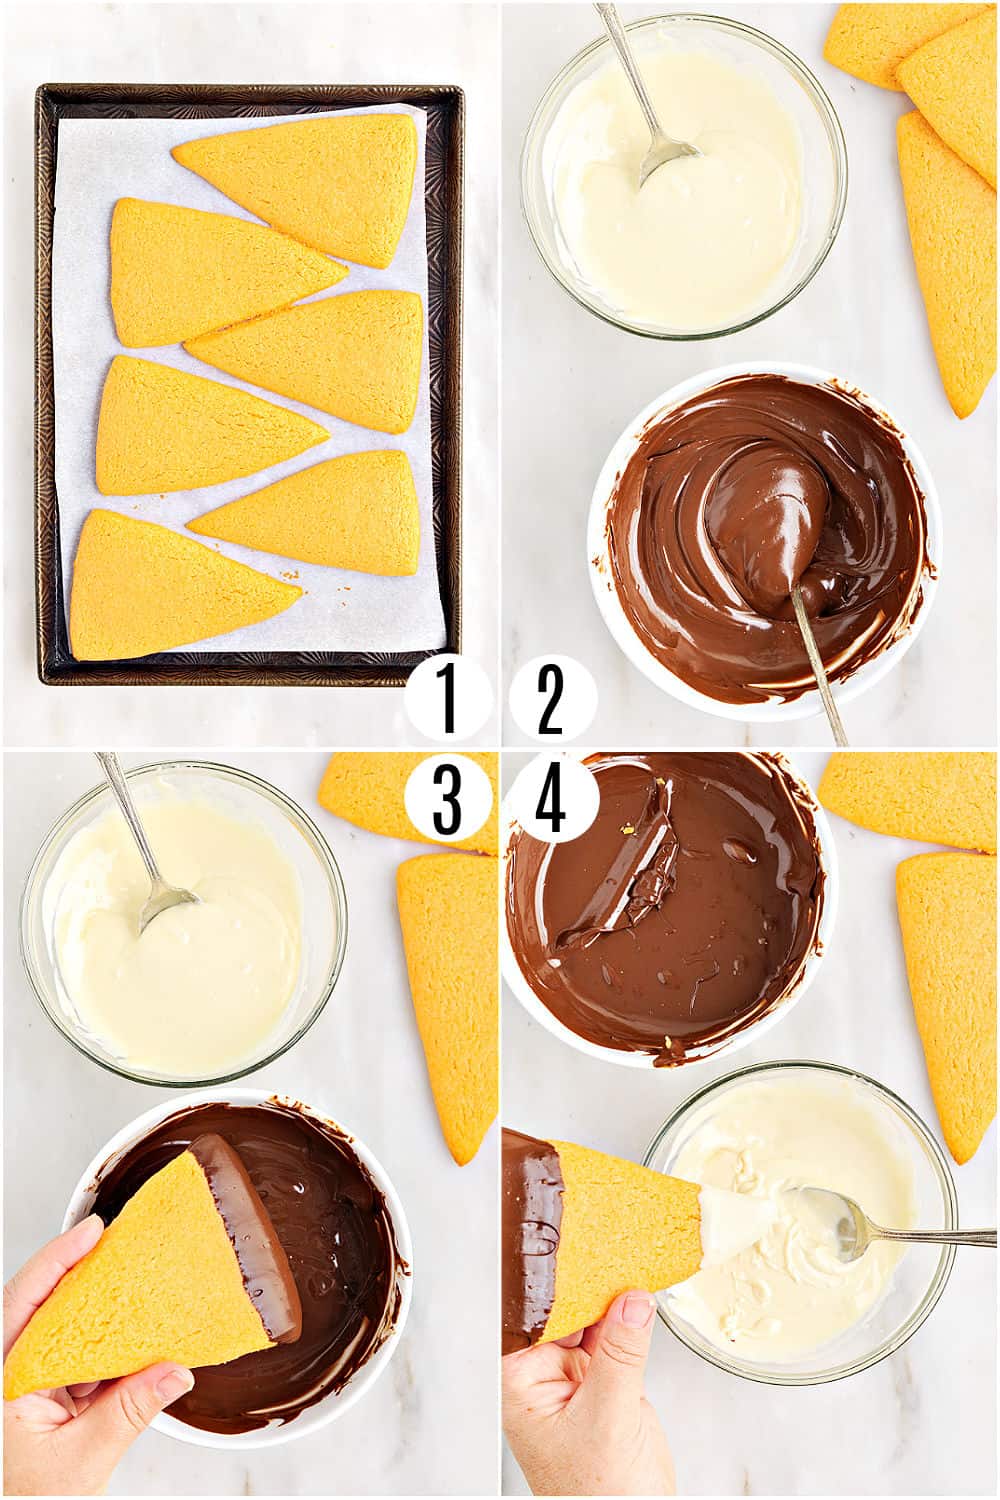 Step by step photos showing how to decorate candy corn sugar cookies.